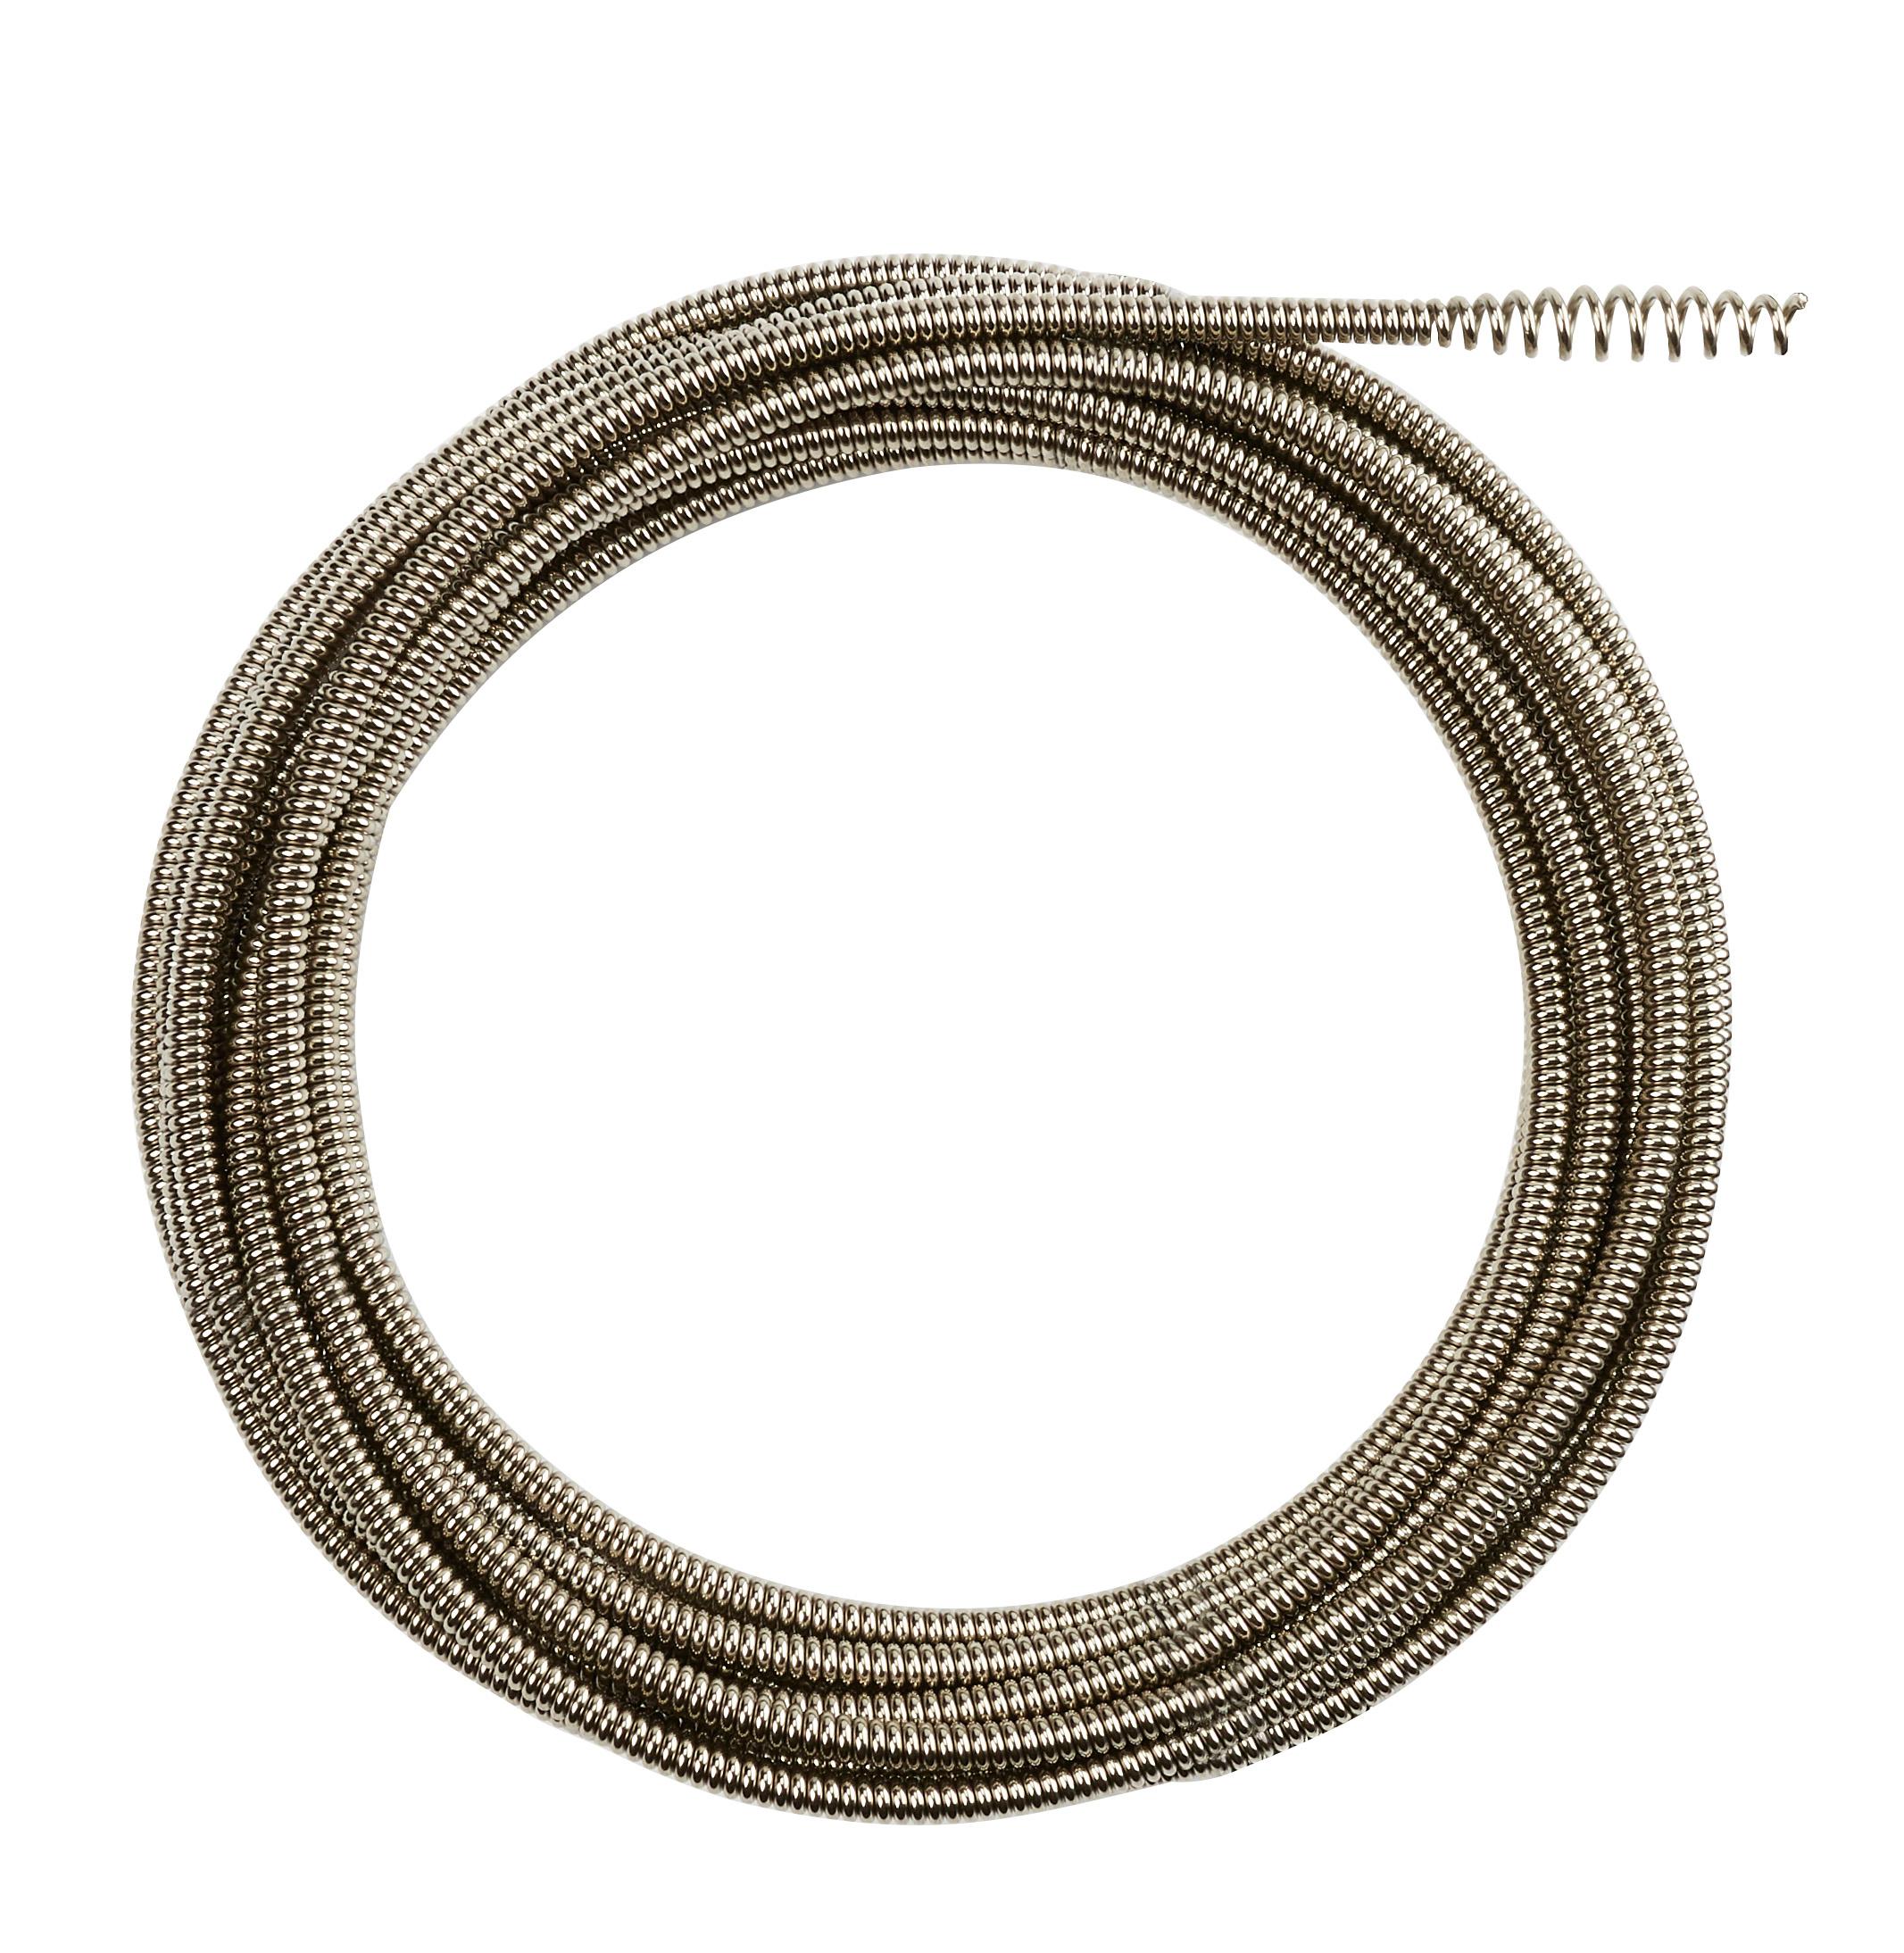 RIDGID® 41697 C-100 Inner Core Cable, 3/4 in Dia x 100 ft L, Steel, For Use With: Model K-750 Drum Machine, 4 to 10 in Drain Line